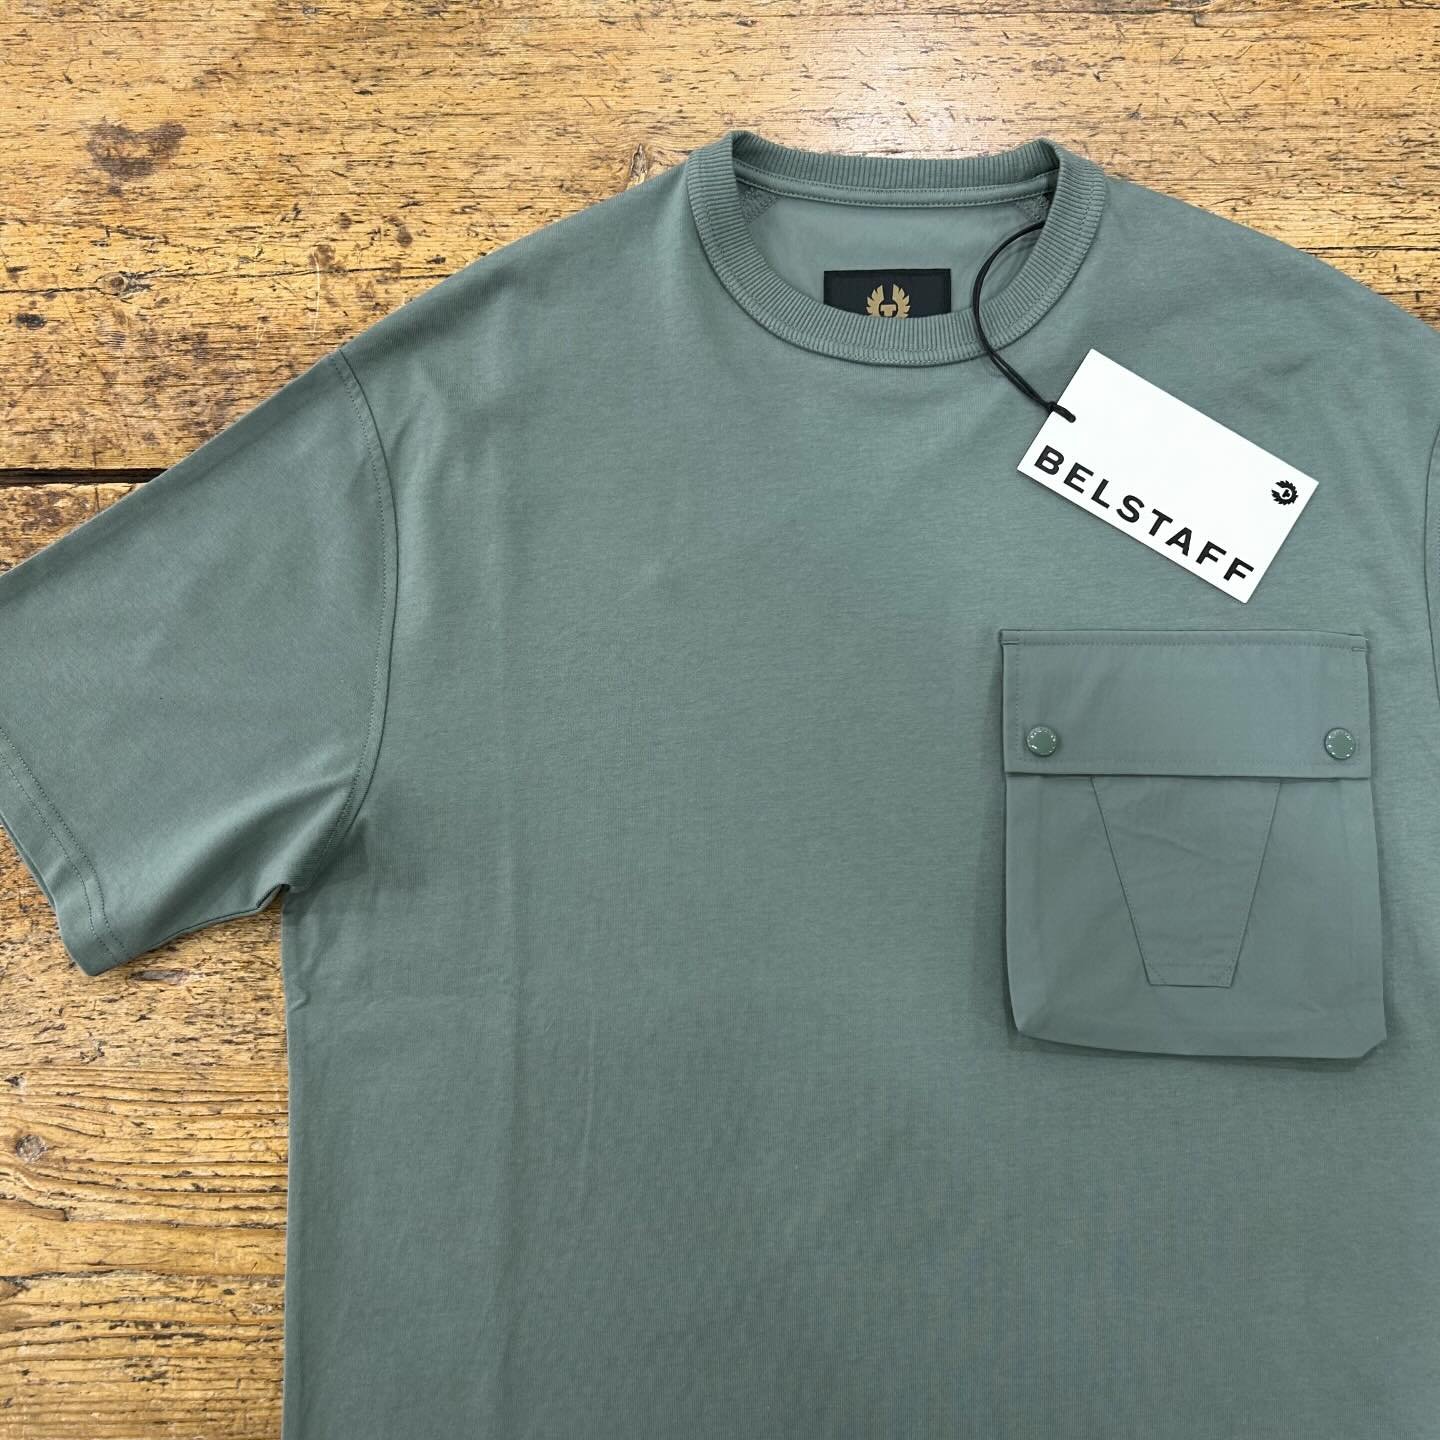 Castmaster T-shirt, available in mineral green, shell and black. 

#belstaff #castmaster #tshirt #pockettee #suttoncoldfield #spring #summervibes #birminghambusiness #supportsmallbusiness #meregreen